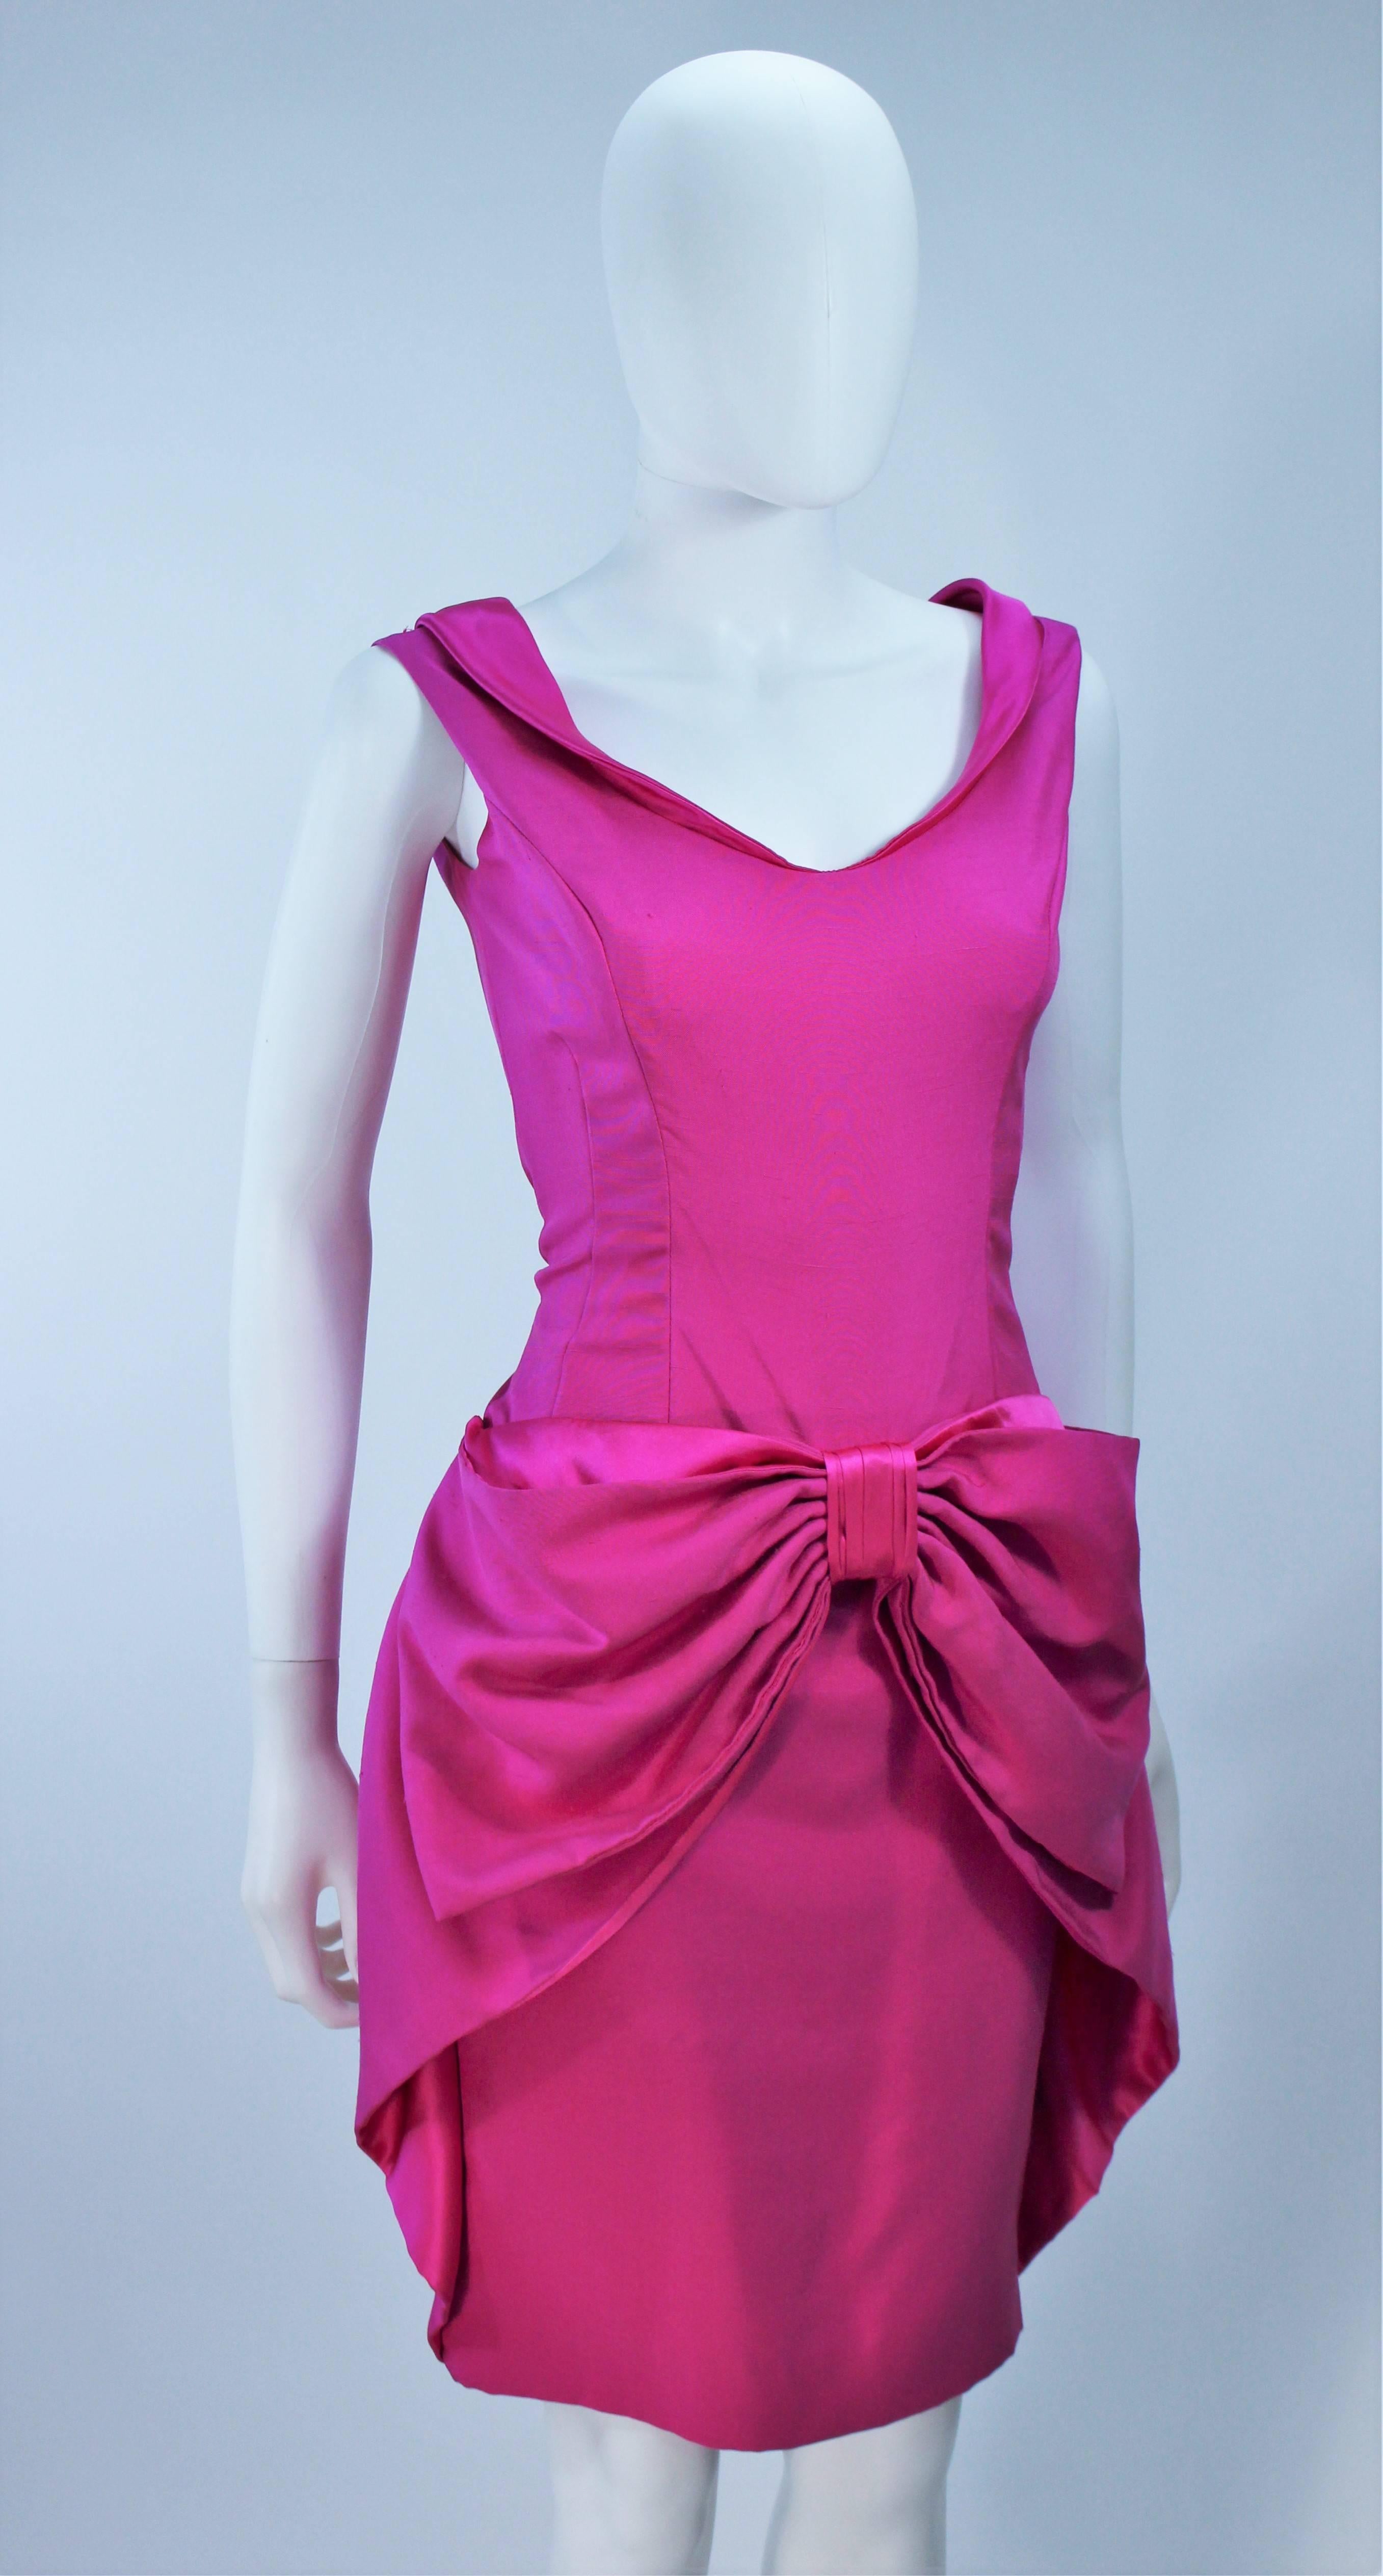 ELIZABETH MASON COUTURE Pink Magenta Bow Cocktail Dress Made to Order For Sale 1